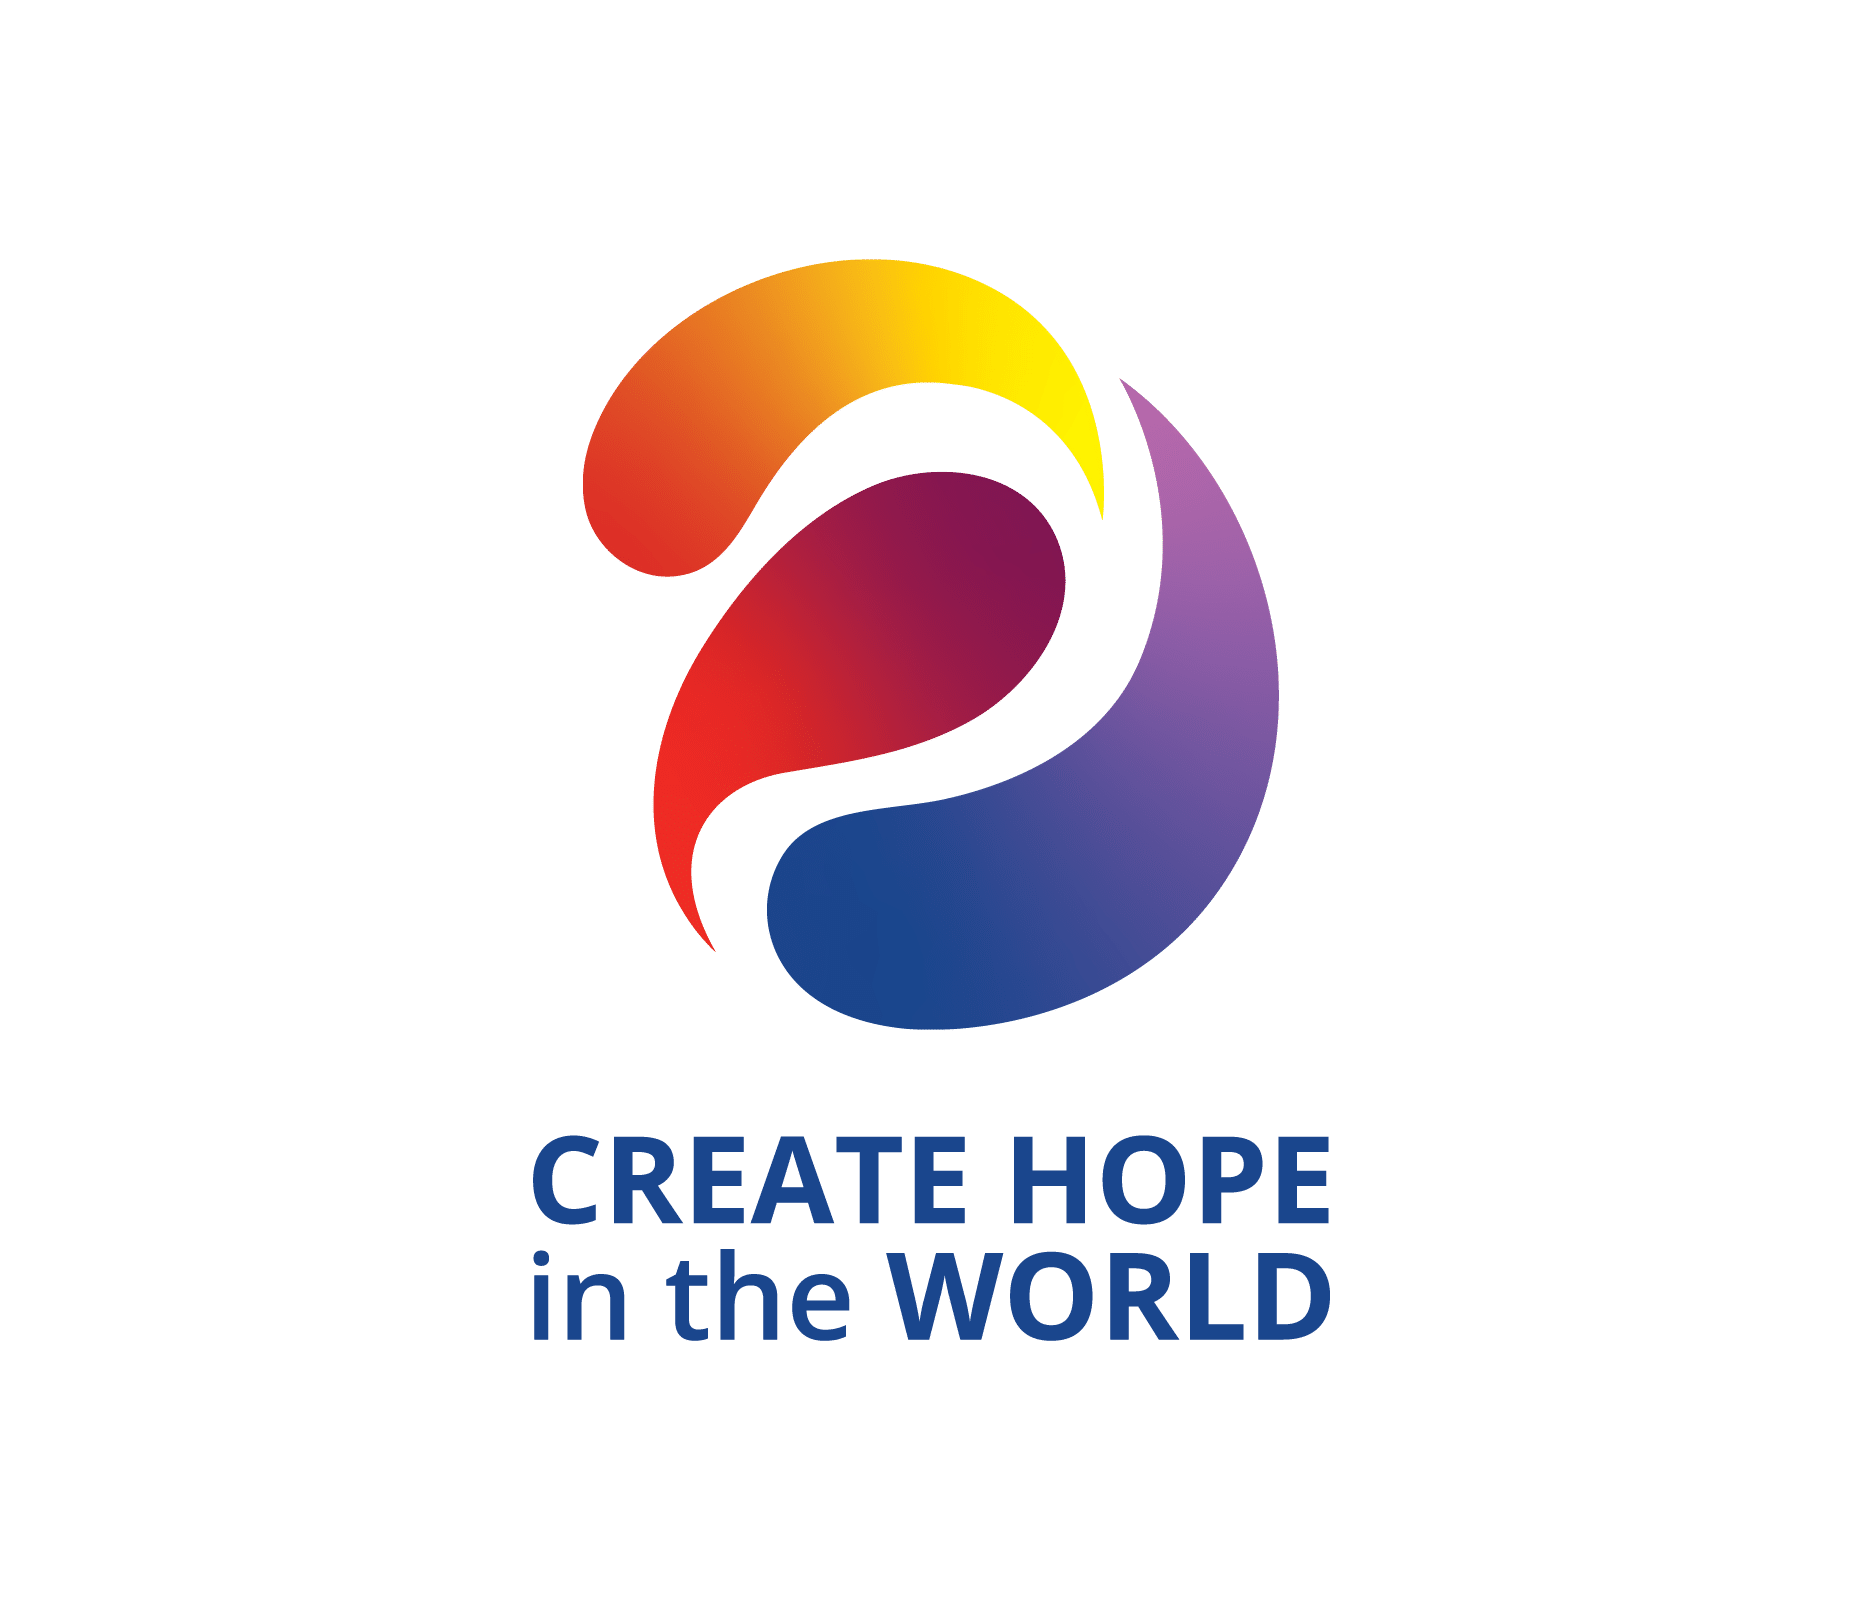 Create Hope in the World is Rotary International's 2023/24 Theme